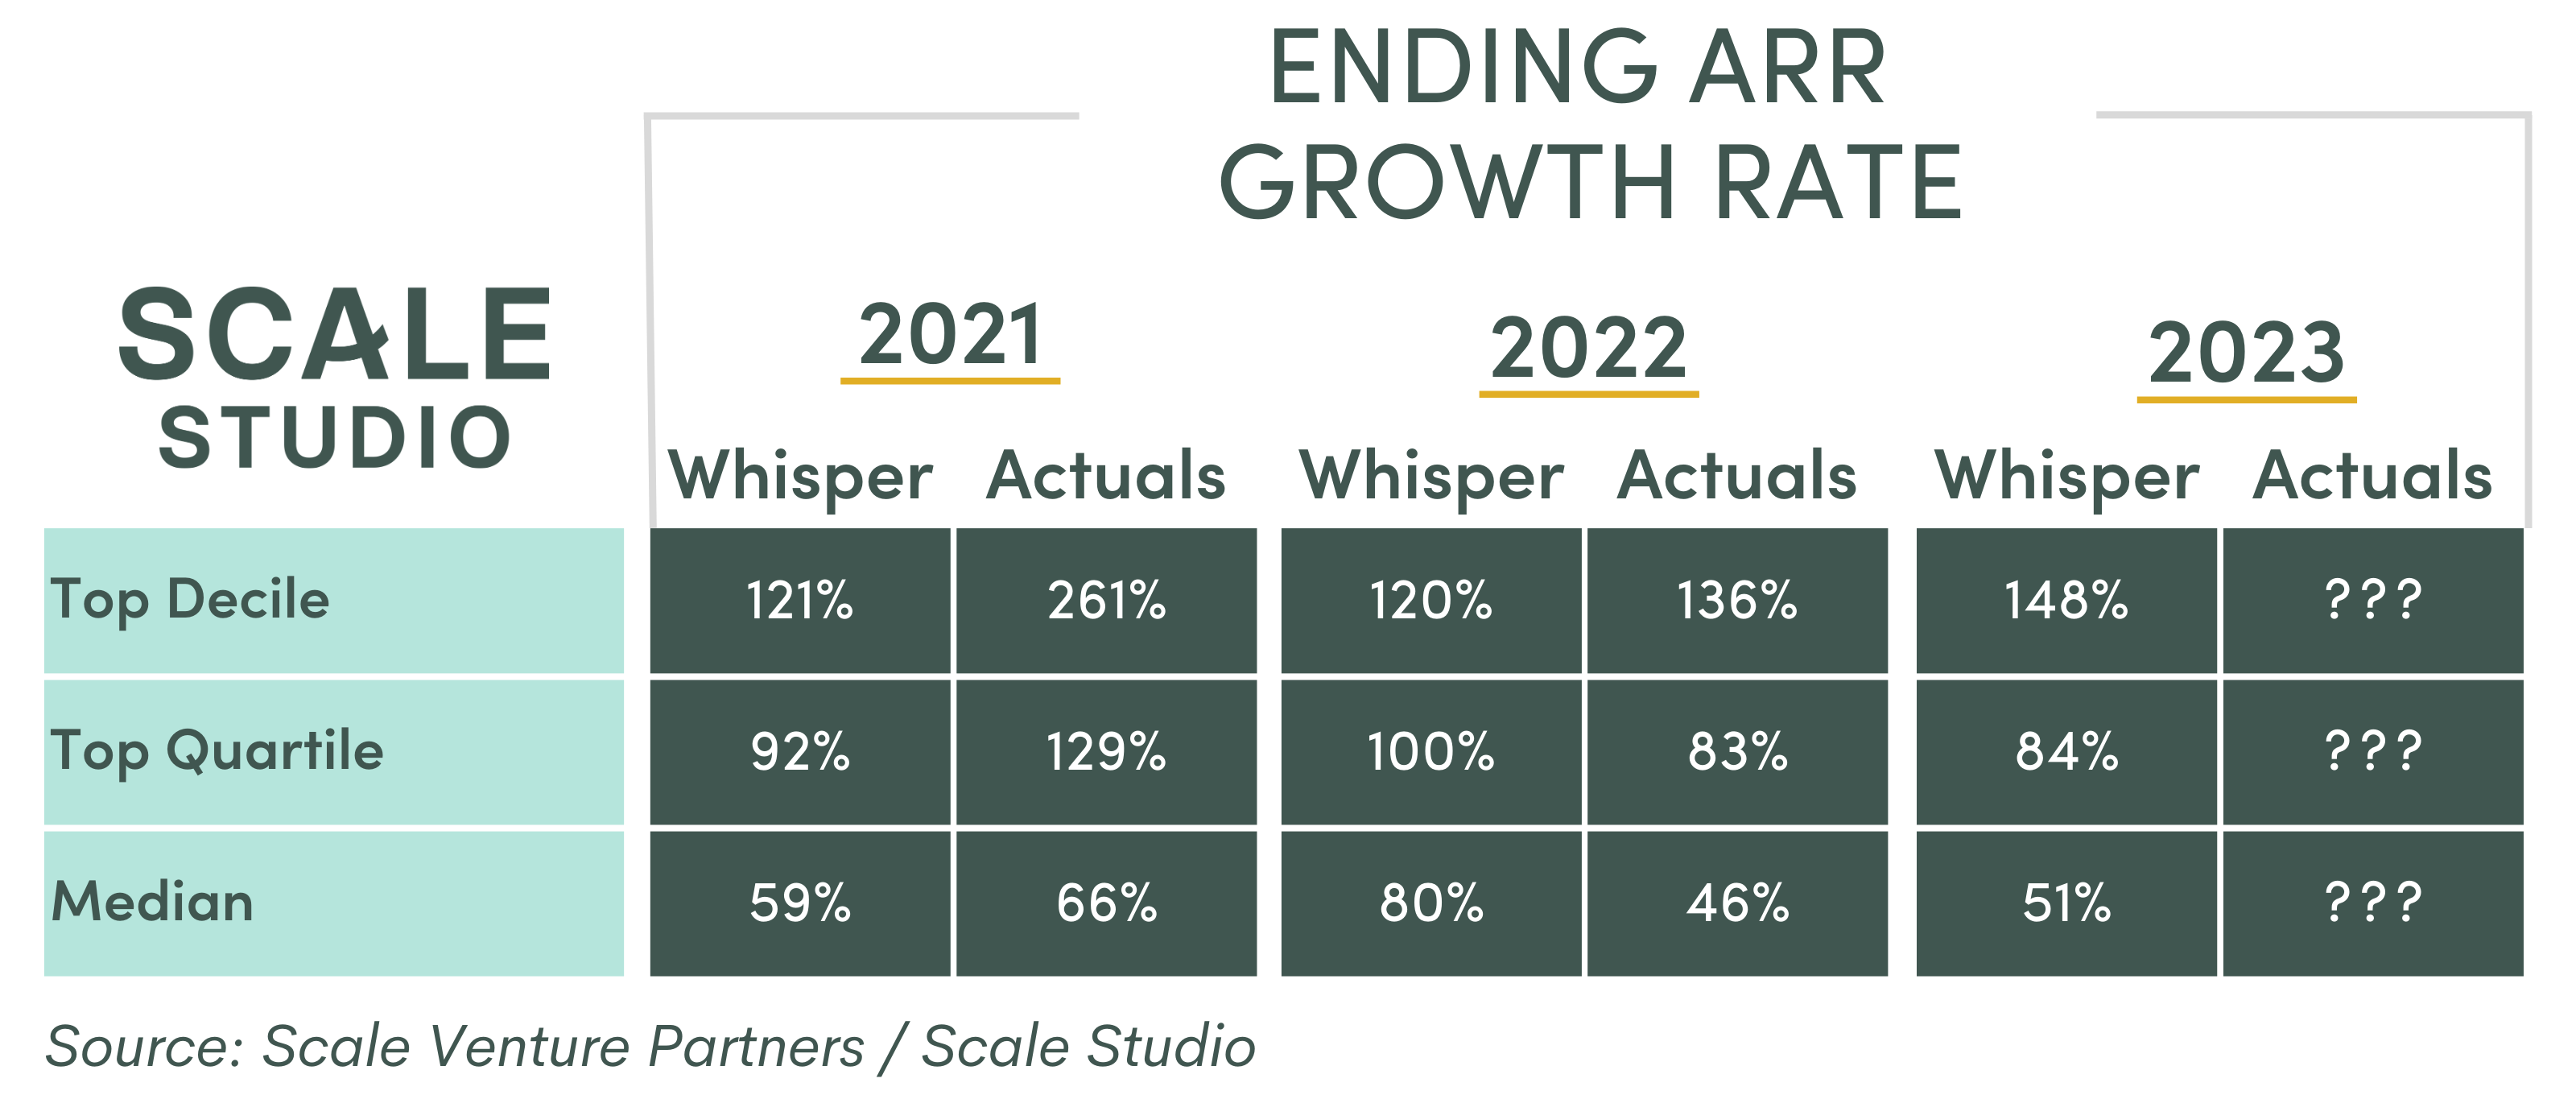 Chat showing Ending ARR Growth rates for 2021-2023, comparing initial beginning of year estimates to actual growth